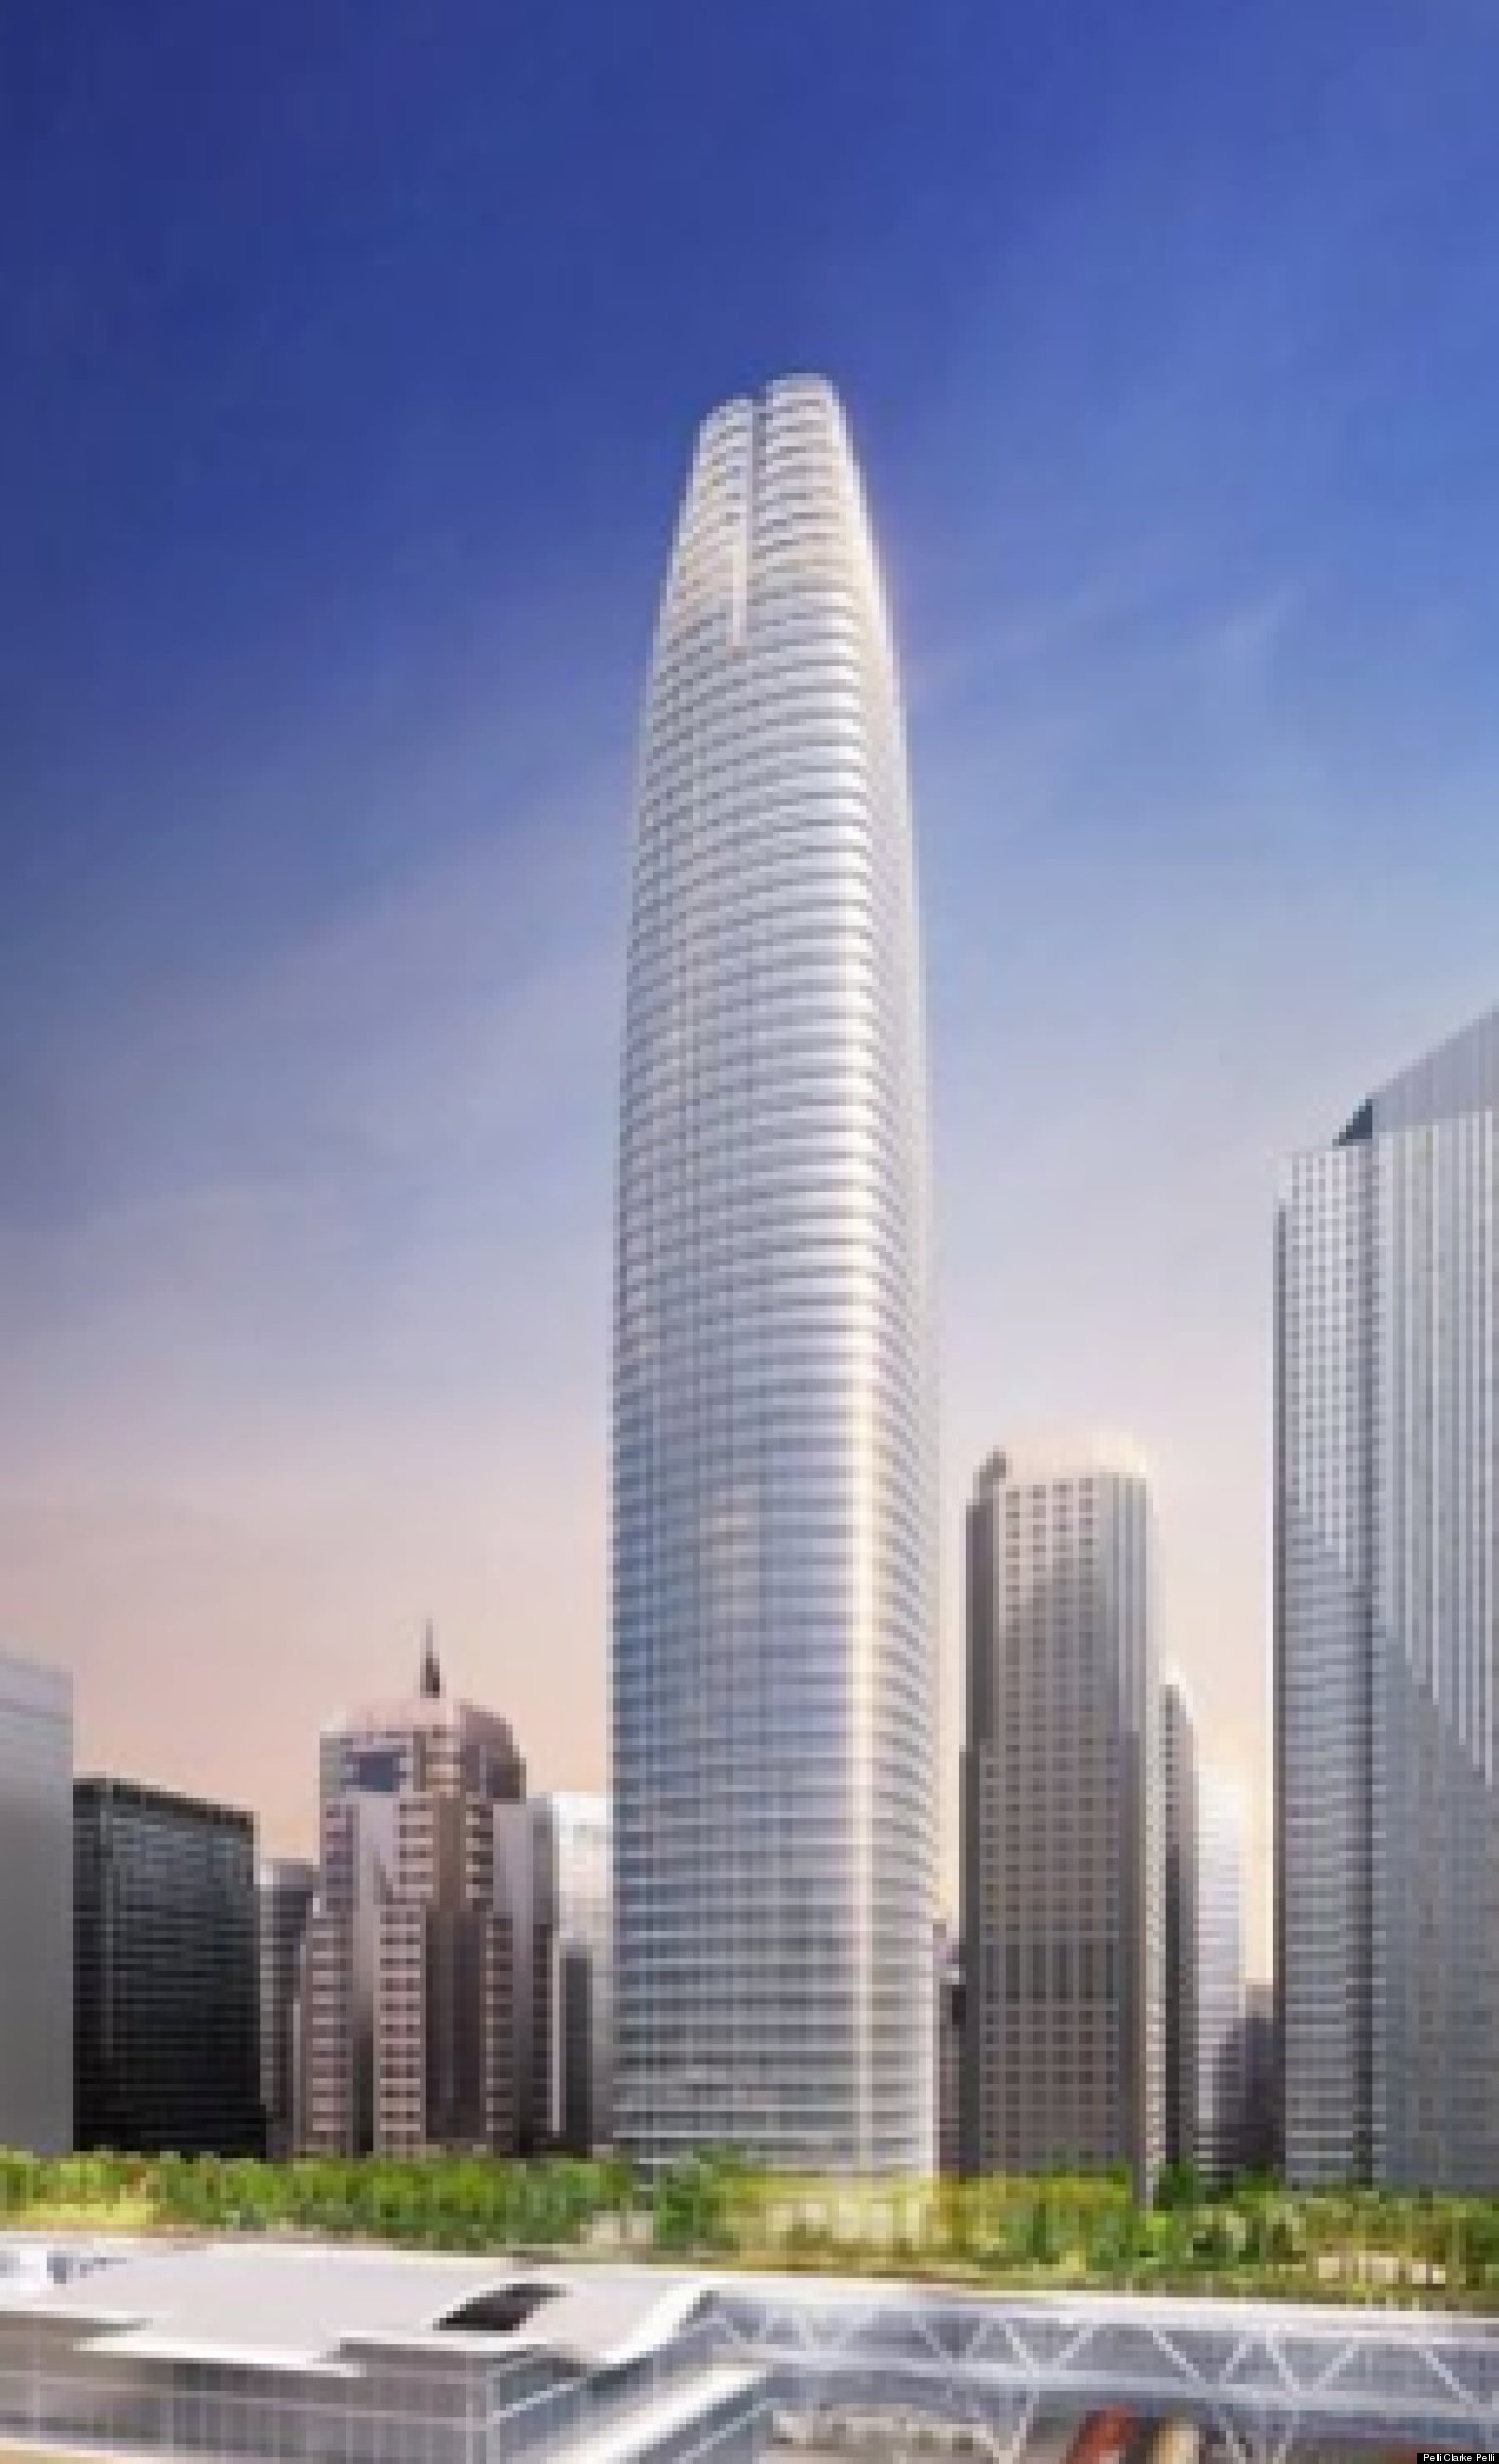 Transbay Tower Tallest Building On West Coast Given Go